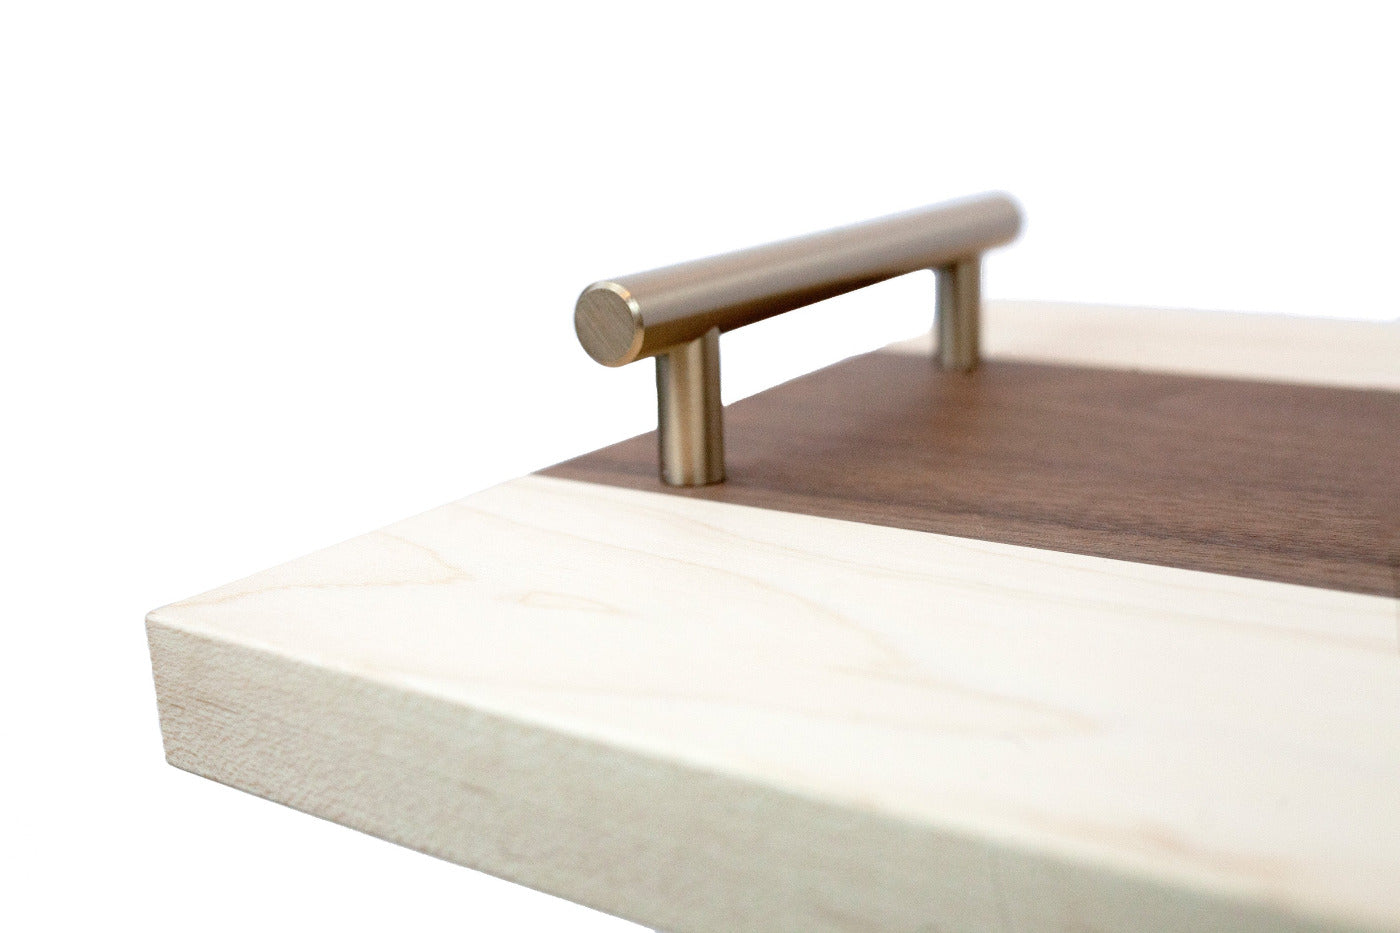 What charcuterie board dreams are made of. This solid hardwood Maple & Walnut serving tray is a versatile and functional work of art.